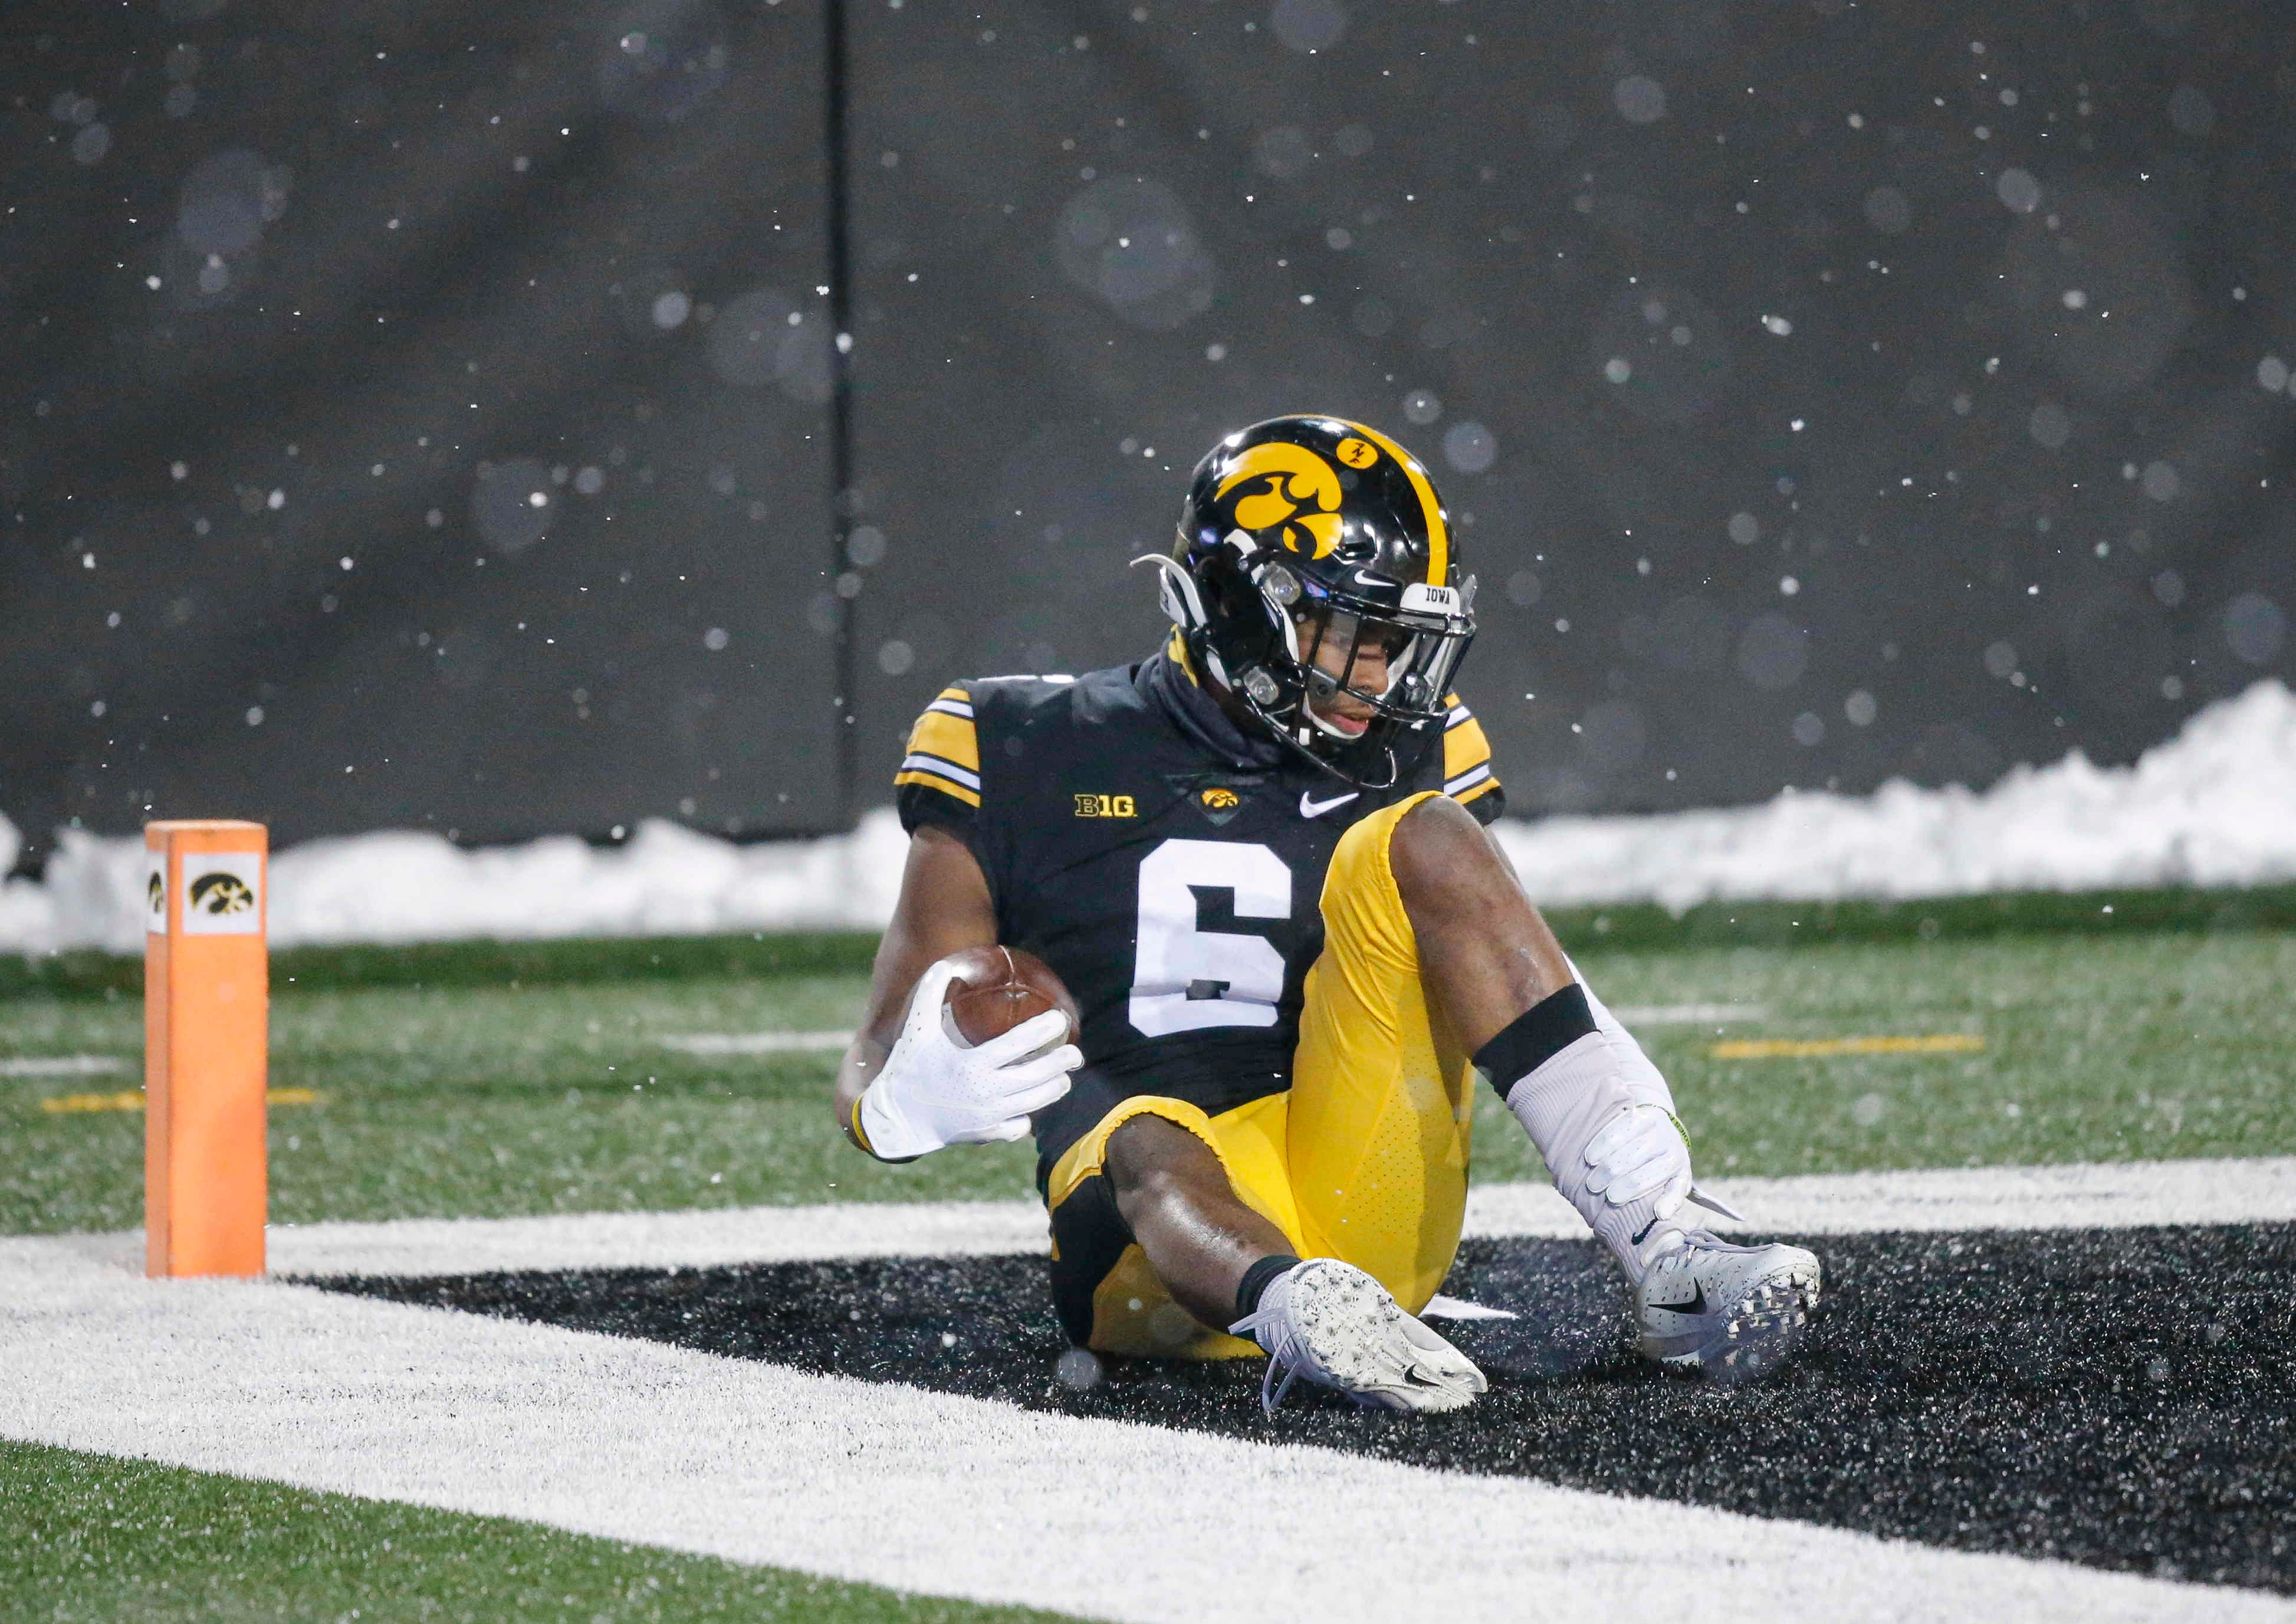 Iowa senior receiver Ihmir Smith-Marsette grabs his ankle after doing a celebratory flip in the end zone after scoring a touchdown against Wisconsin on Saturday, Dec. 12, 2020, at Kinnick Stadium in Iowa City, Iowa.